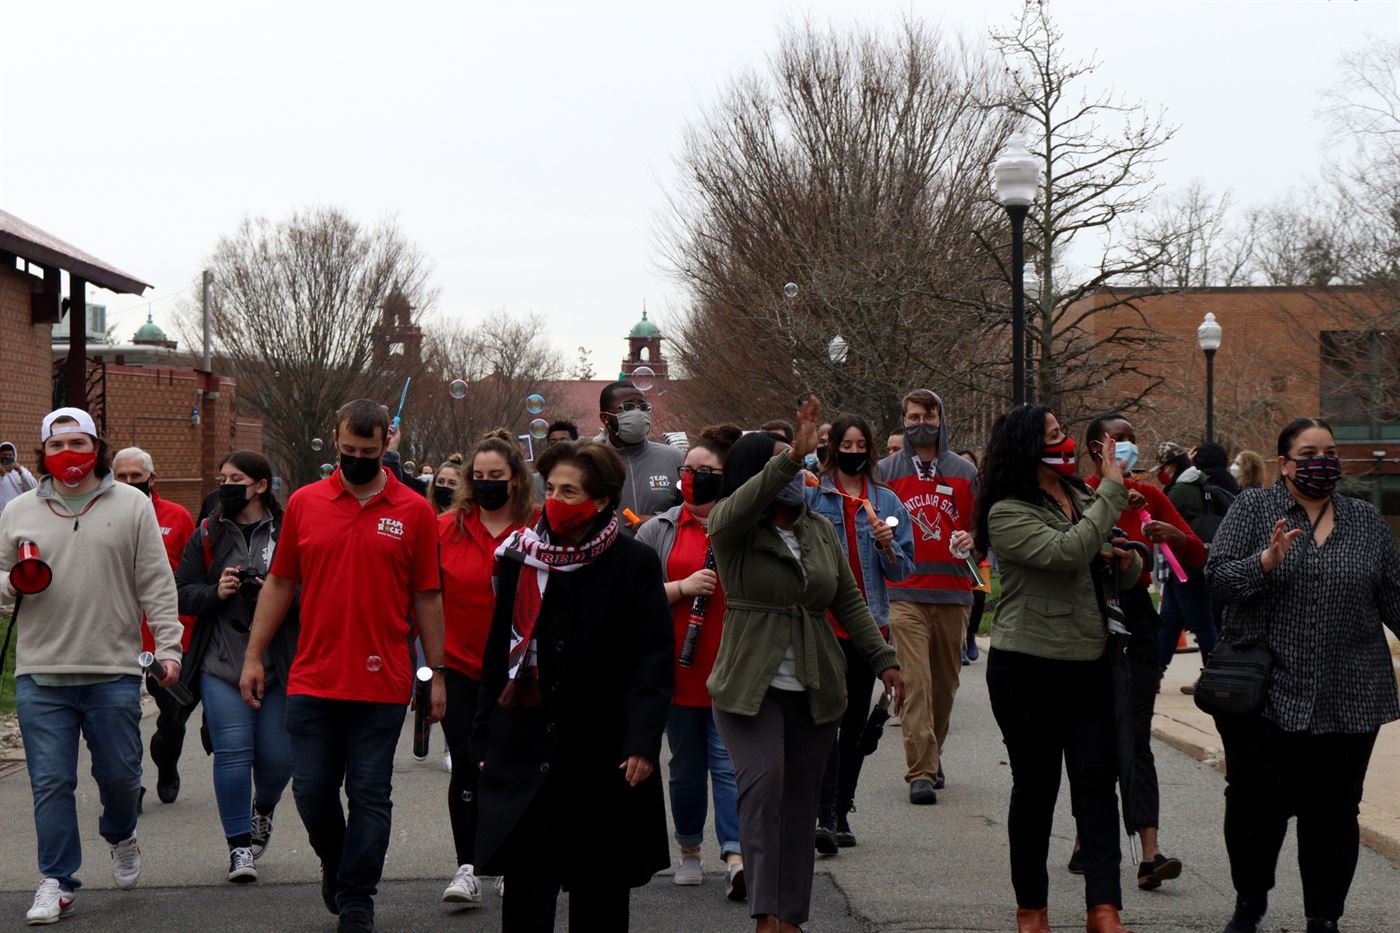 Dr. Cole leads dozens of facility members and students down University Promenade, with College Hall looming in the background. John LaRosa | The Montclarion